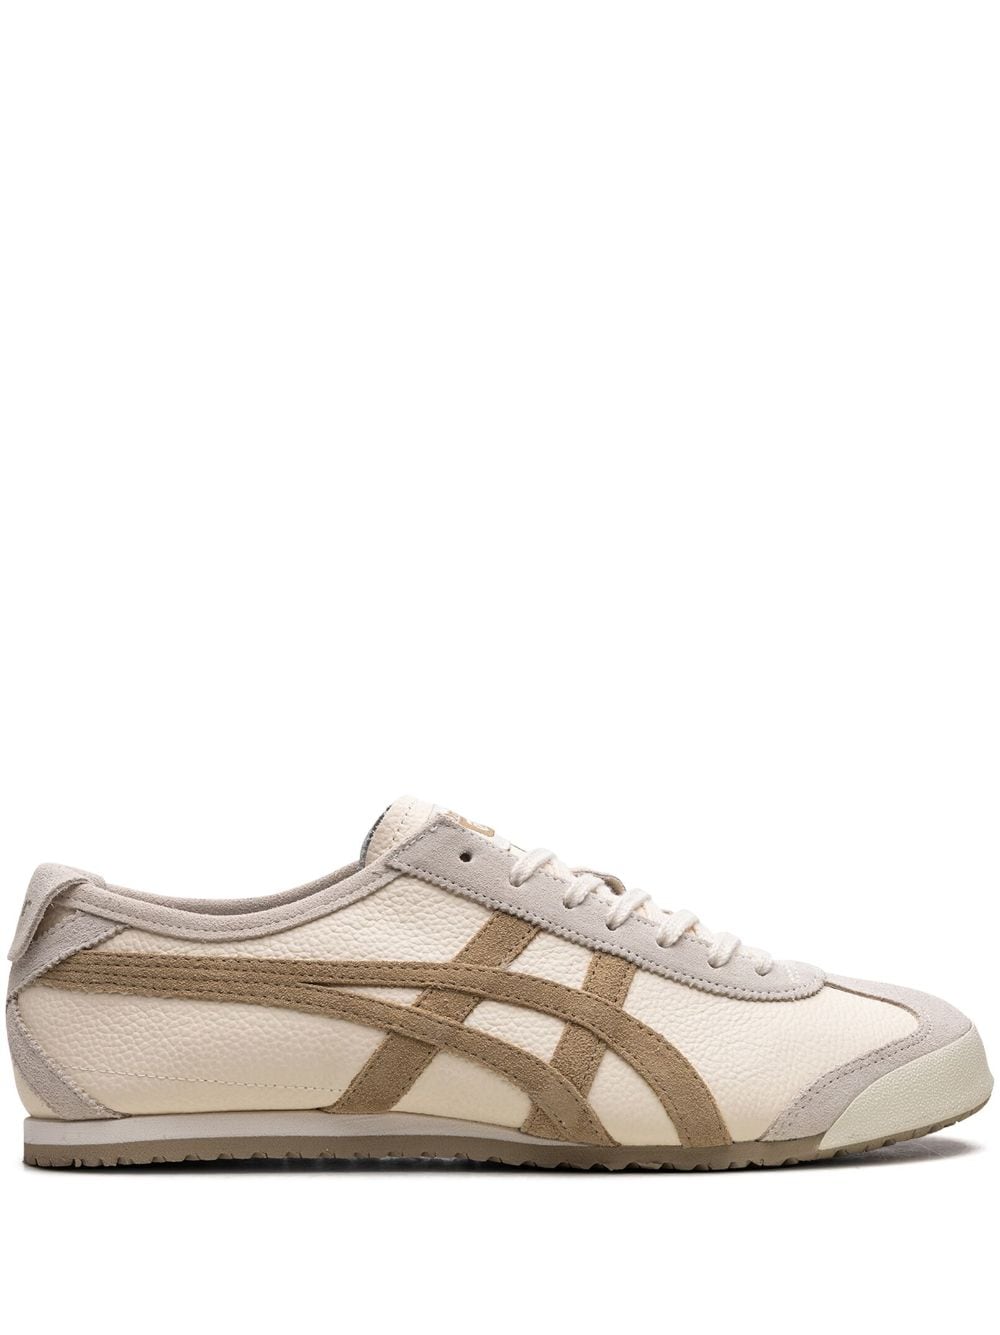 Onitsuka Tiger Mexico 66 Vin "white/grey/brown" Sneakers In Neutrals